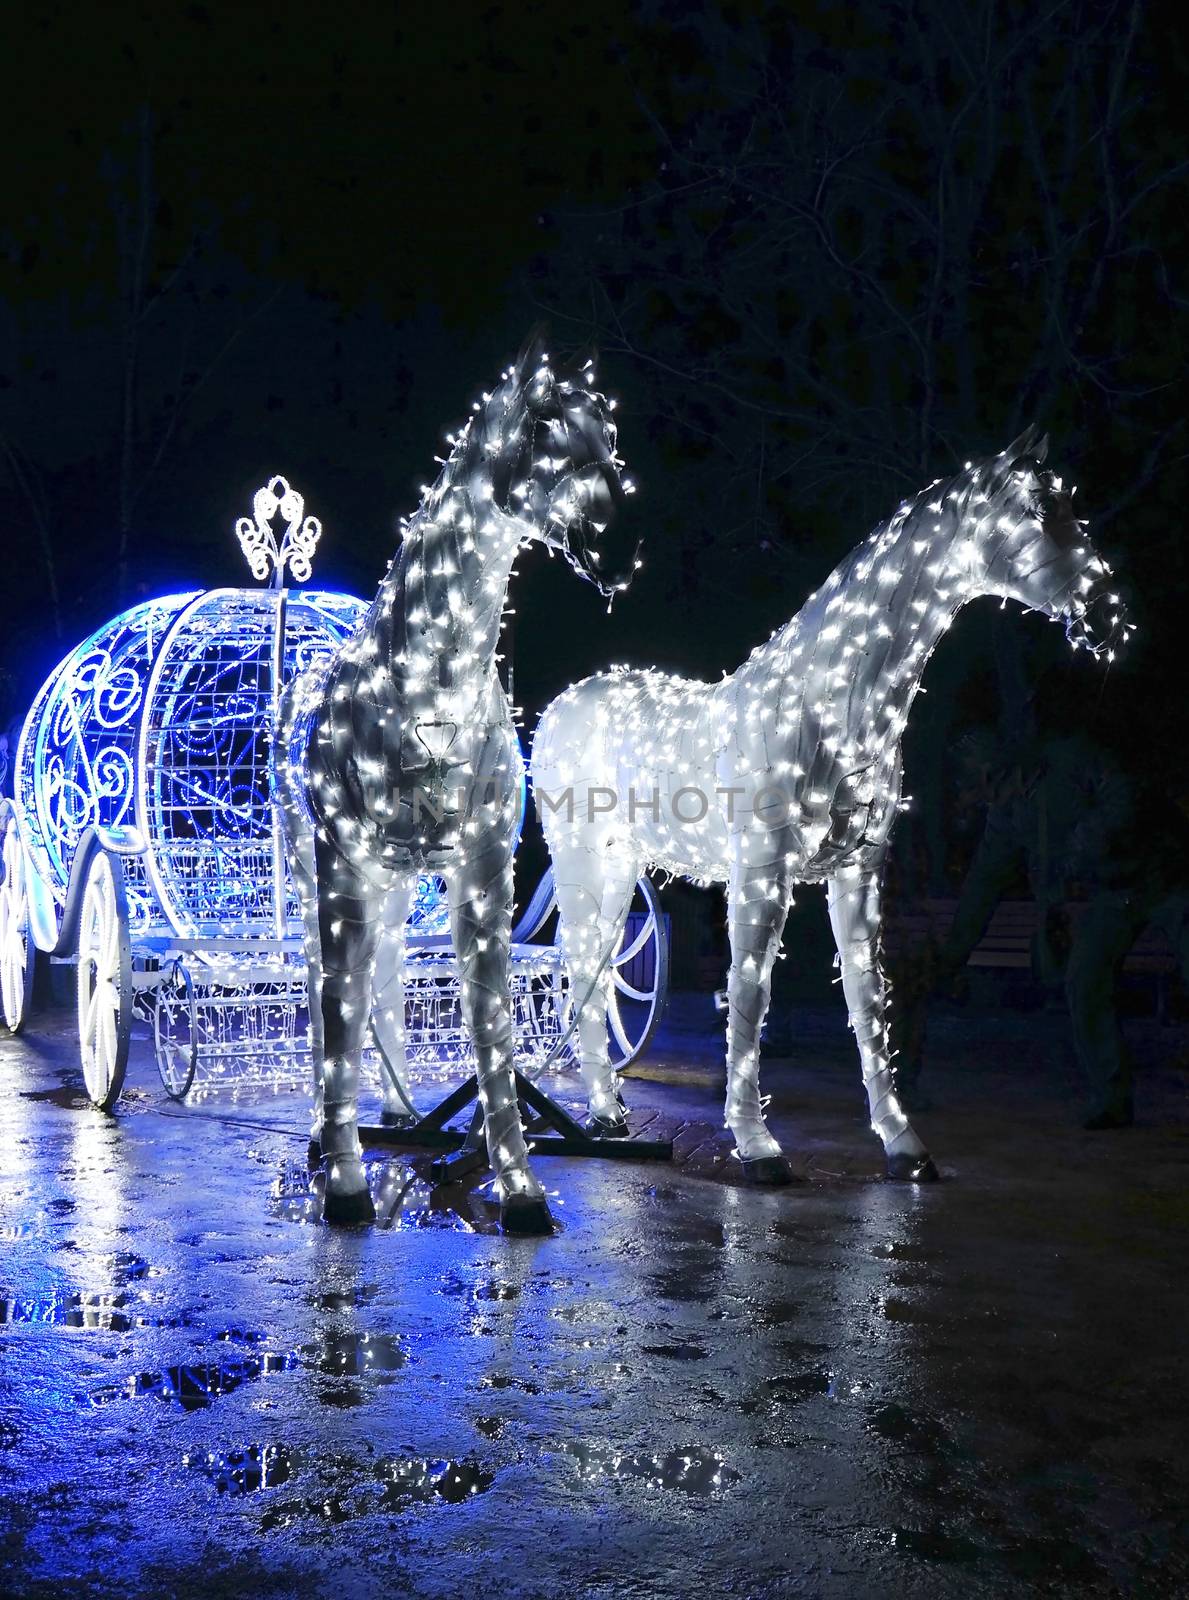 Decorative carriage with horses decorated with lights                                                             